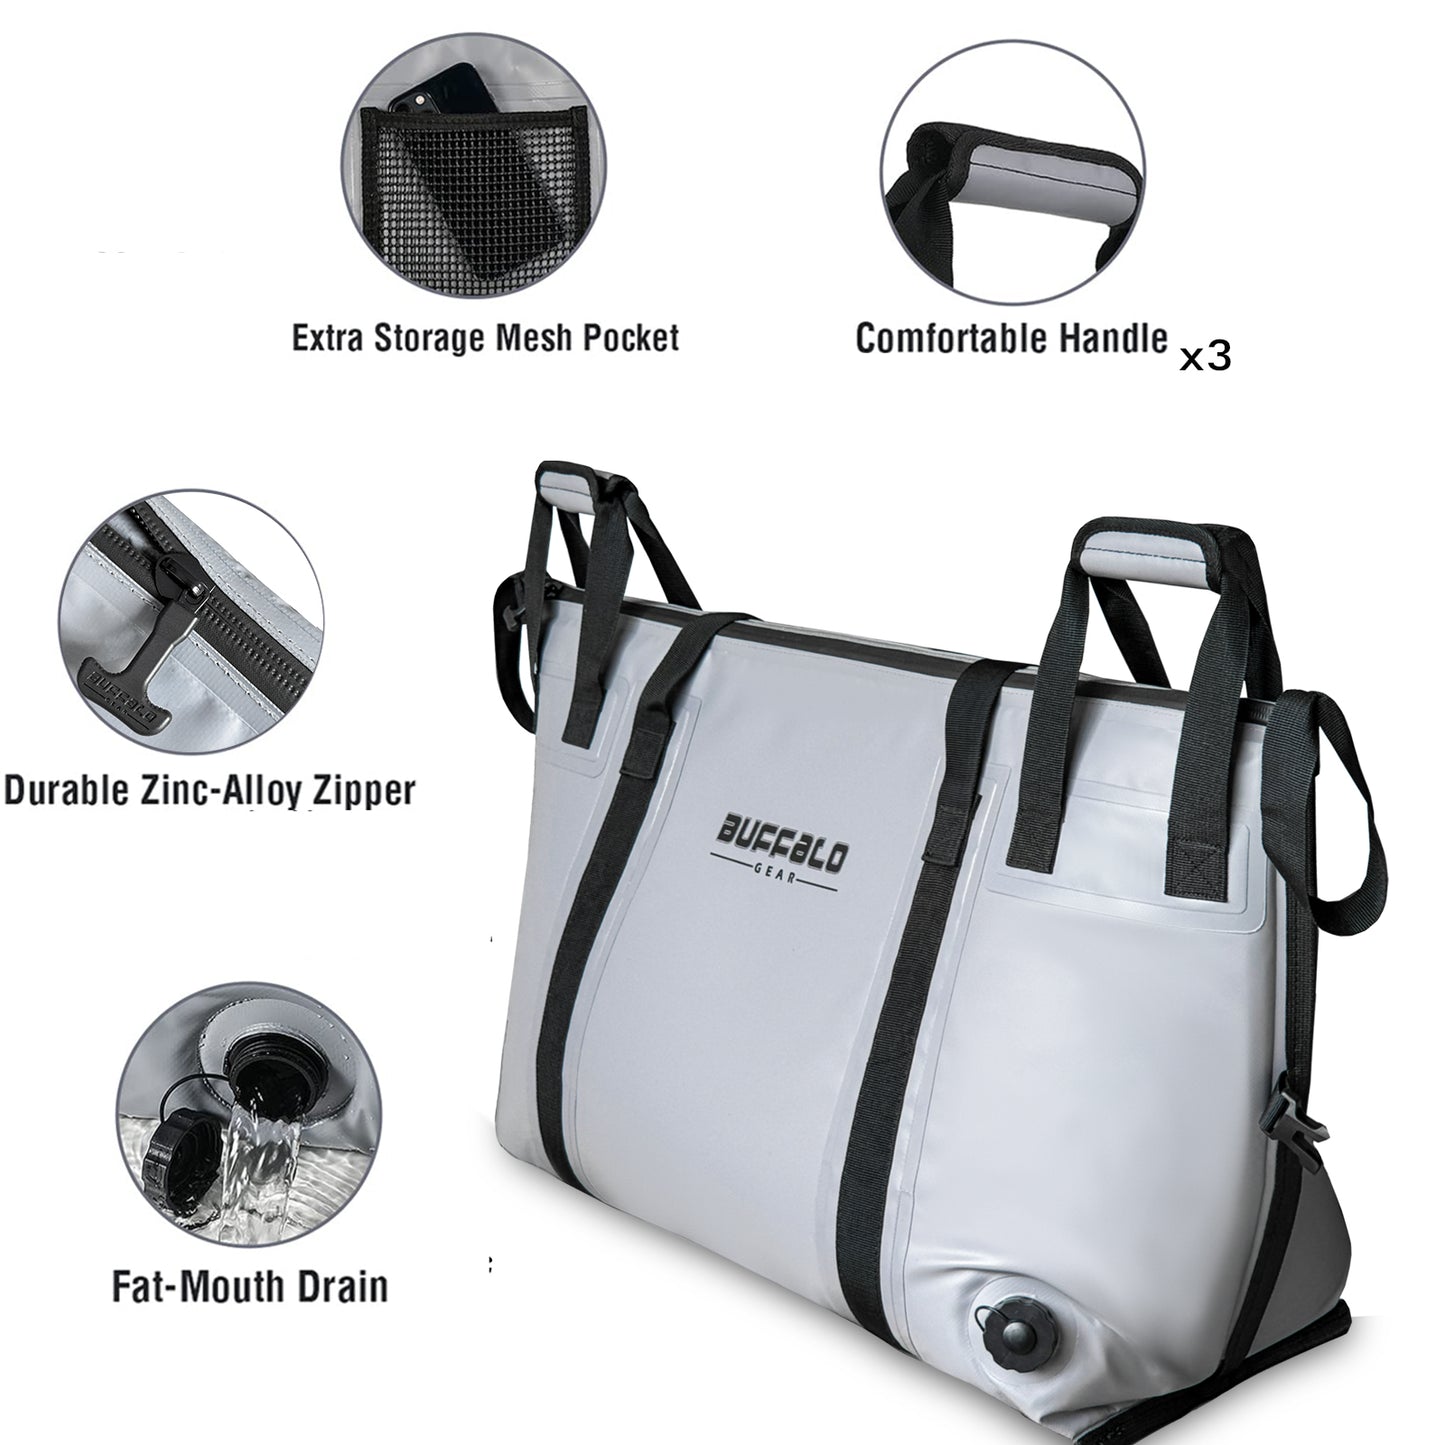 55L Insulated Fish Cooler Bag With Flat Bottom - Buffalo Gear 